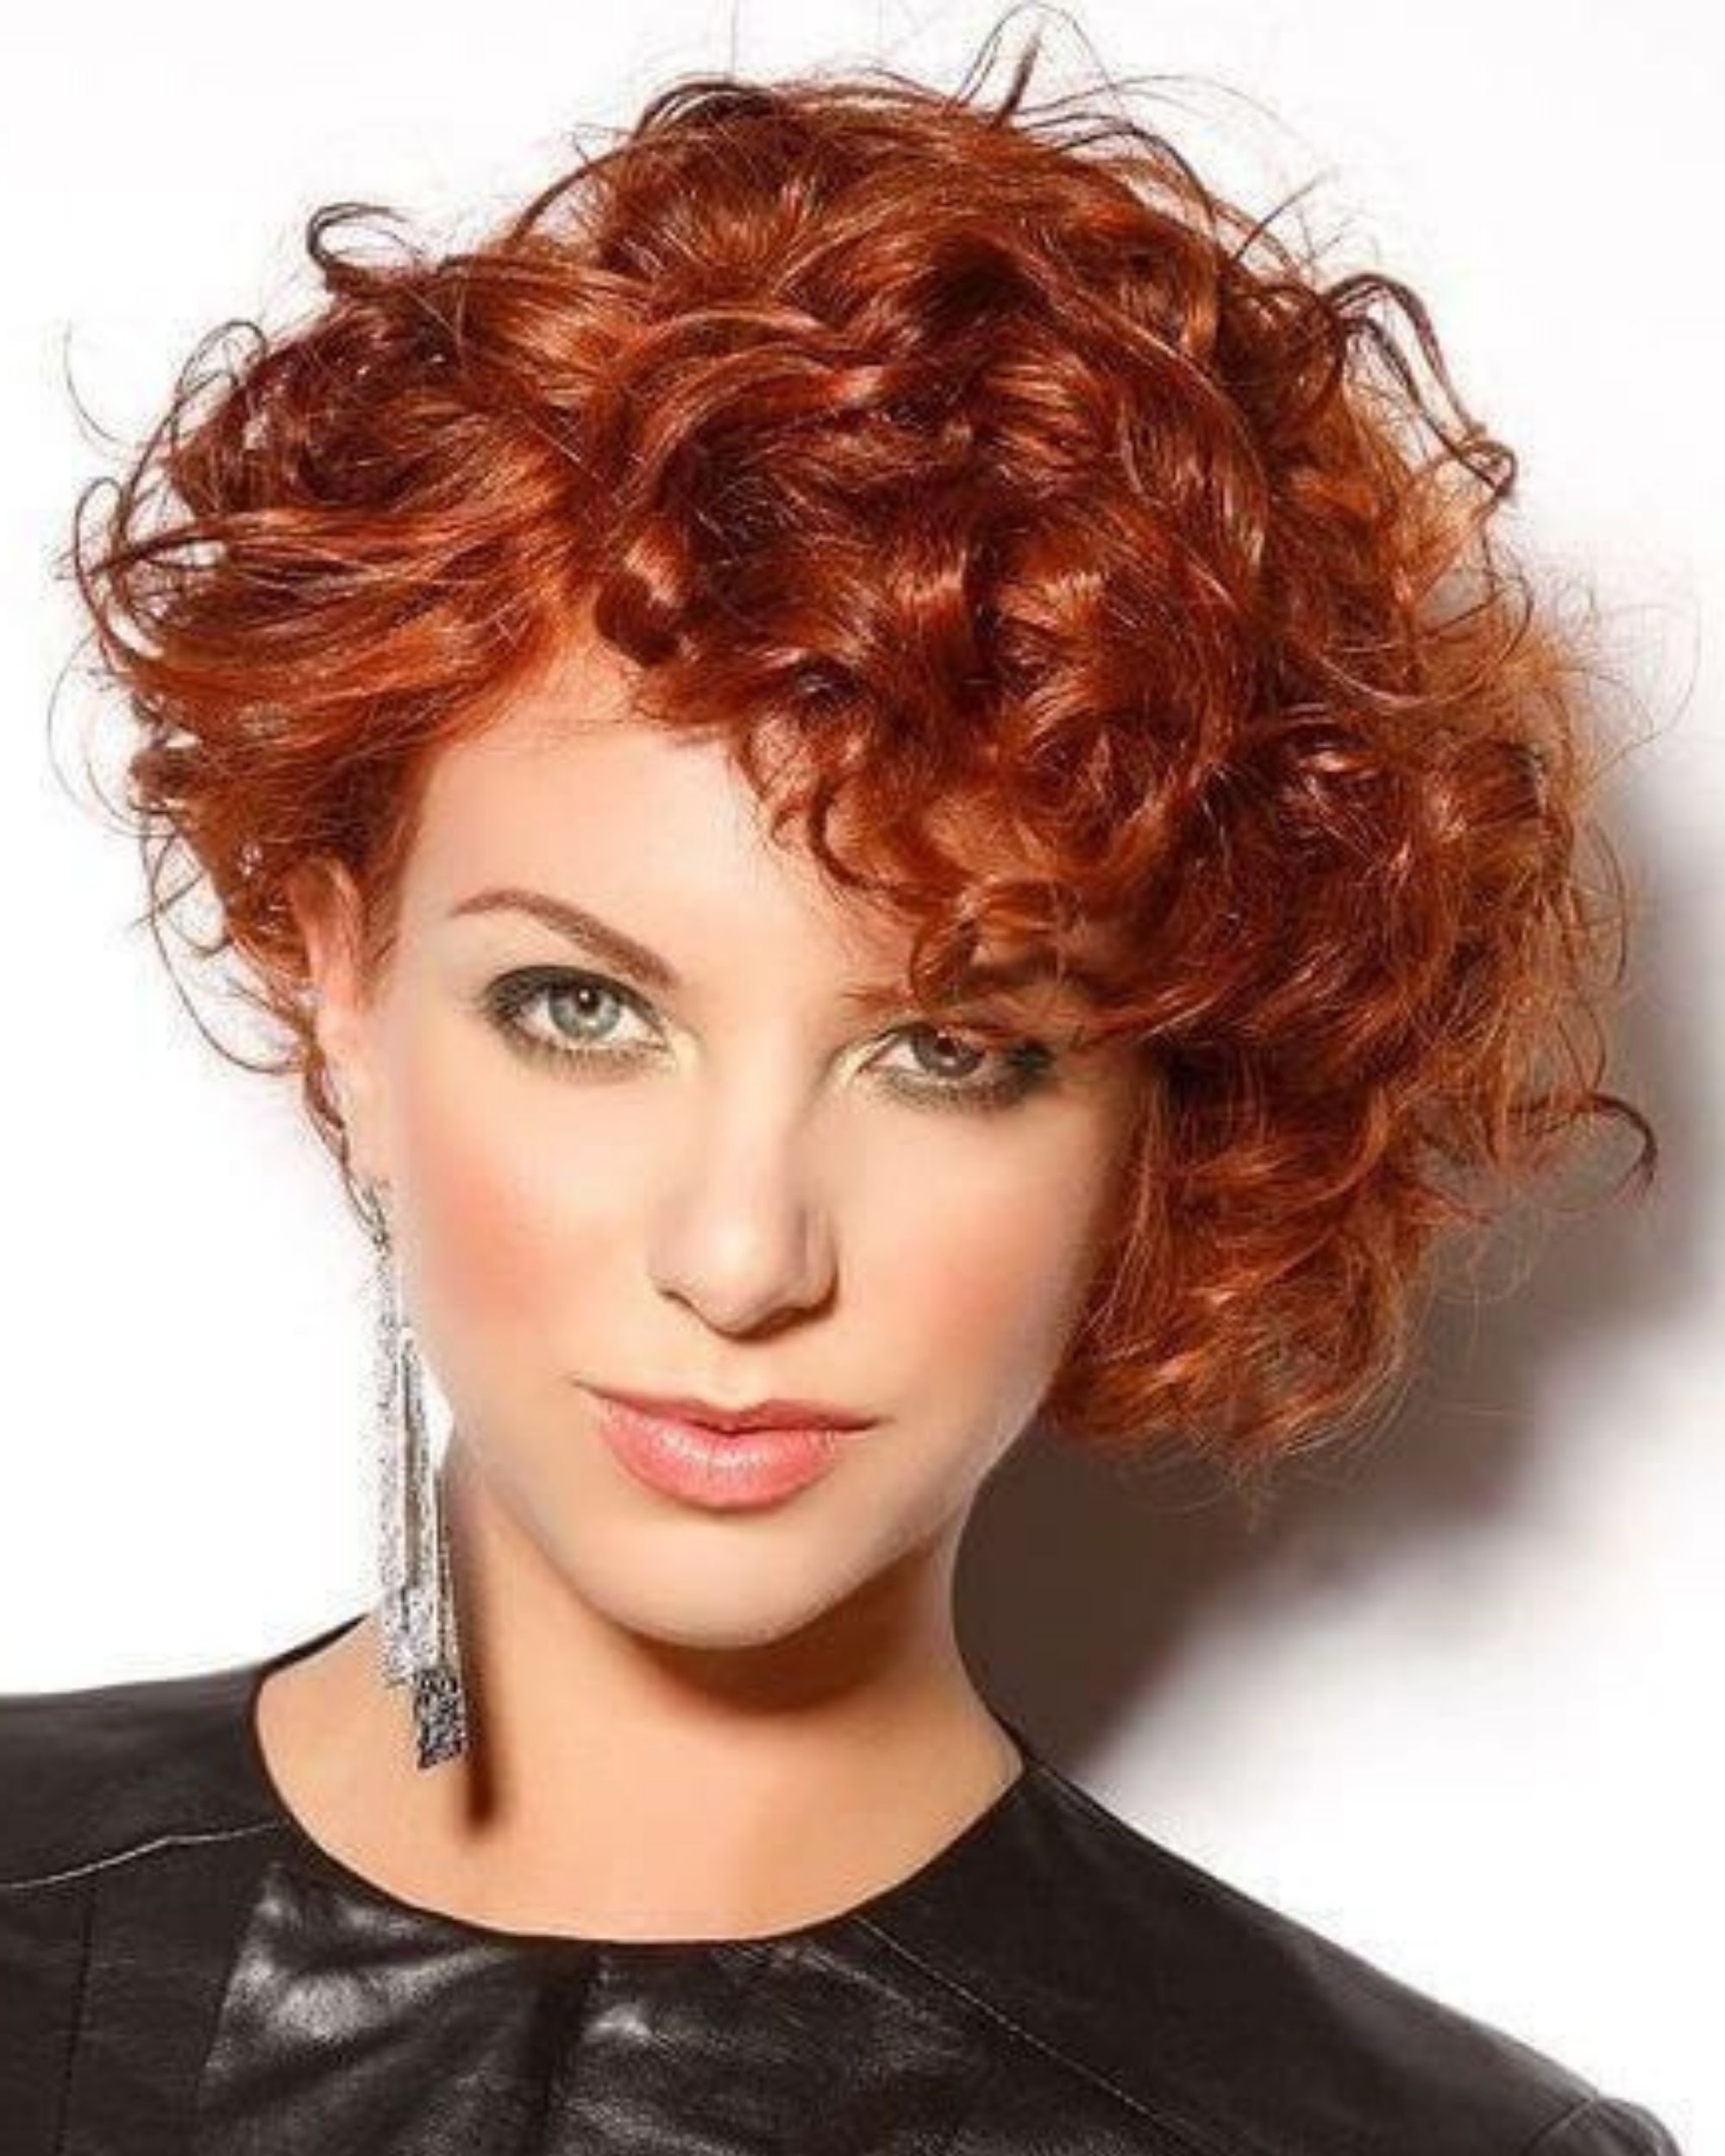 chubby face short curly hairstyles